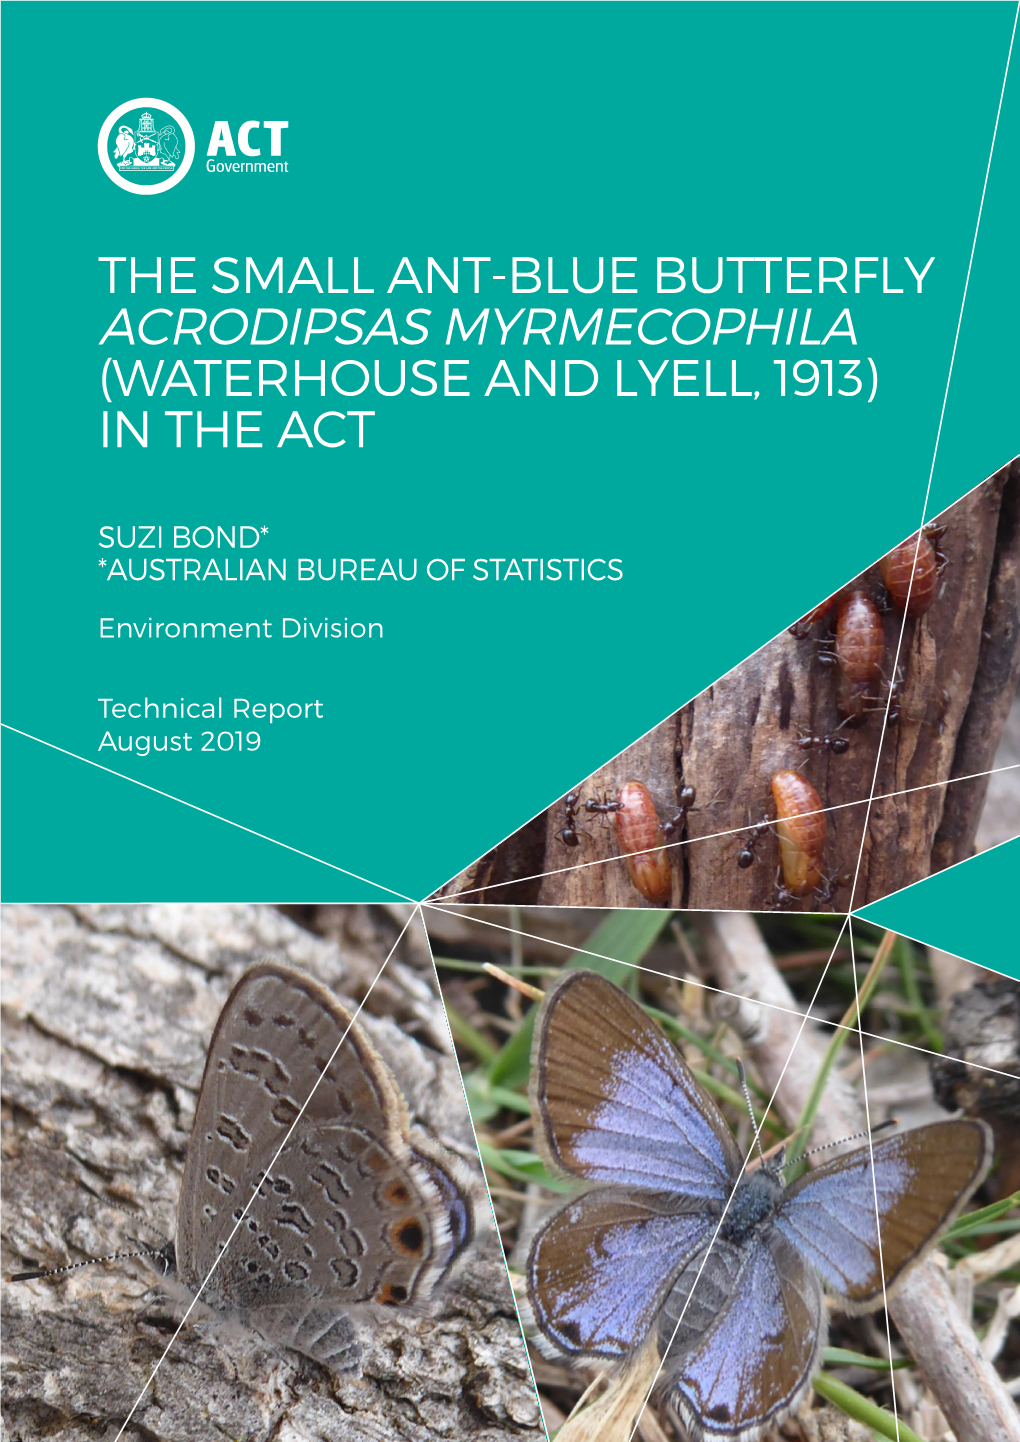 The Small Ant-Blue Butterfly in The